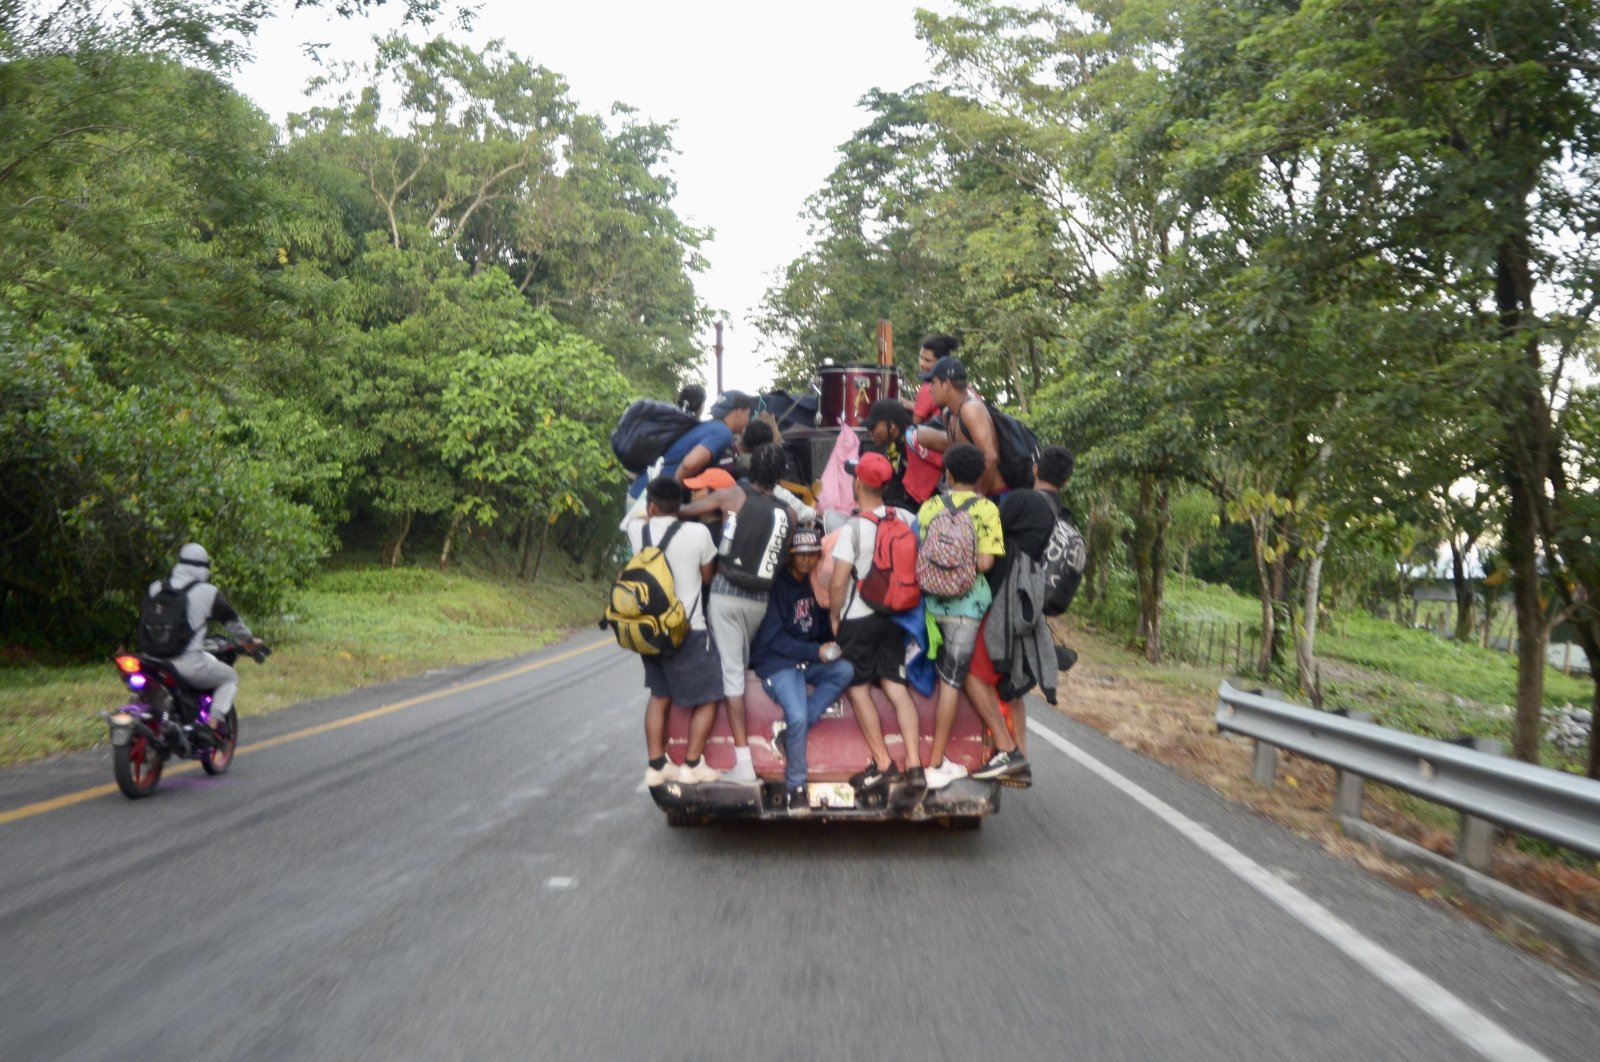 Immigrants crossing into Mexico from Guatemala on the back of a truck, Chiapas, Mexico. (Jacob Garcia/Anadolu Ajansı)